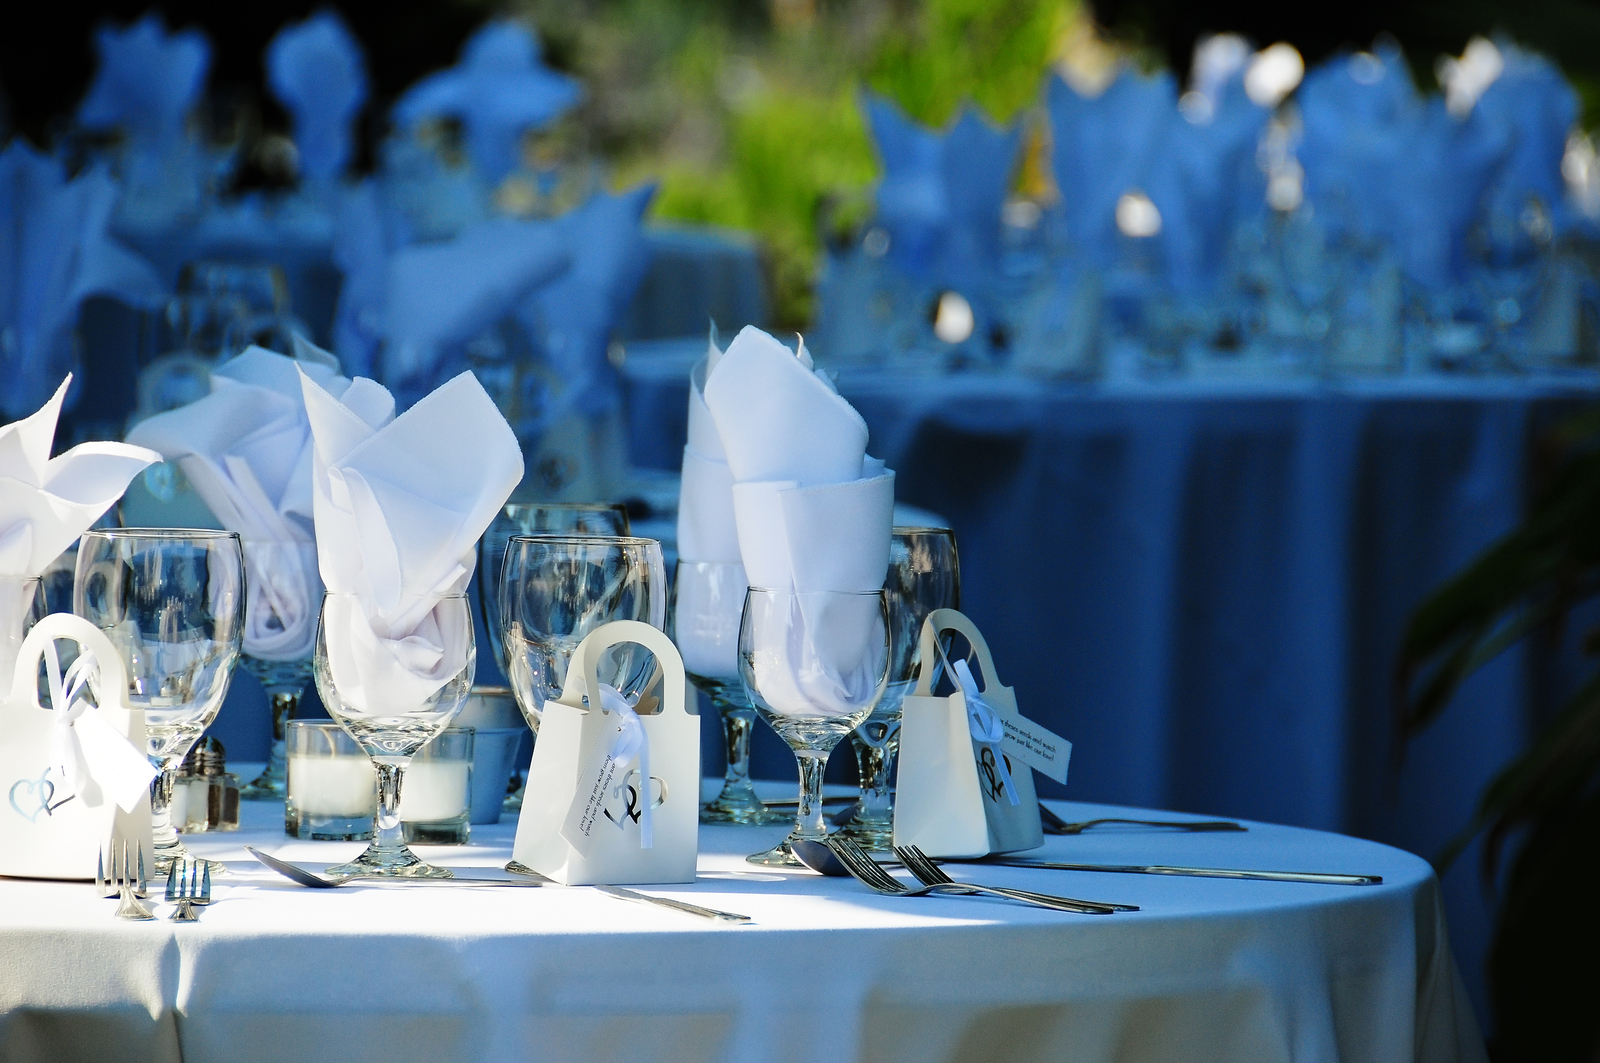 A round table set for a wedding reception in the open air (cropped)